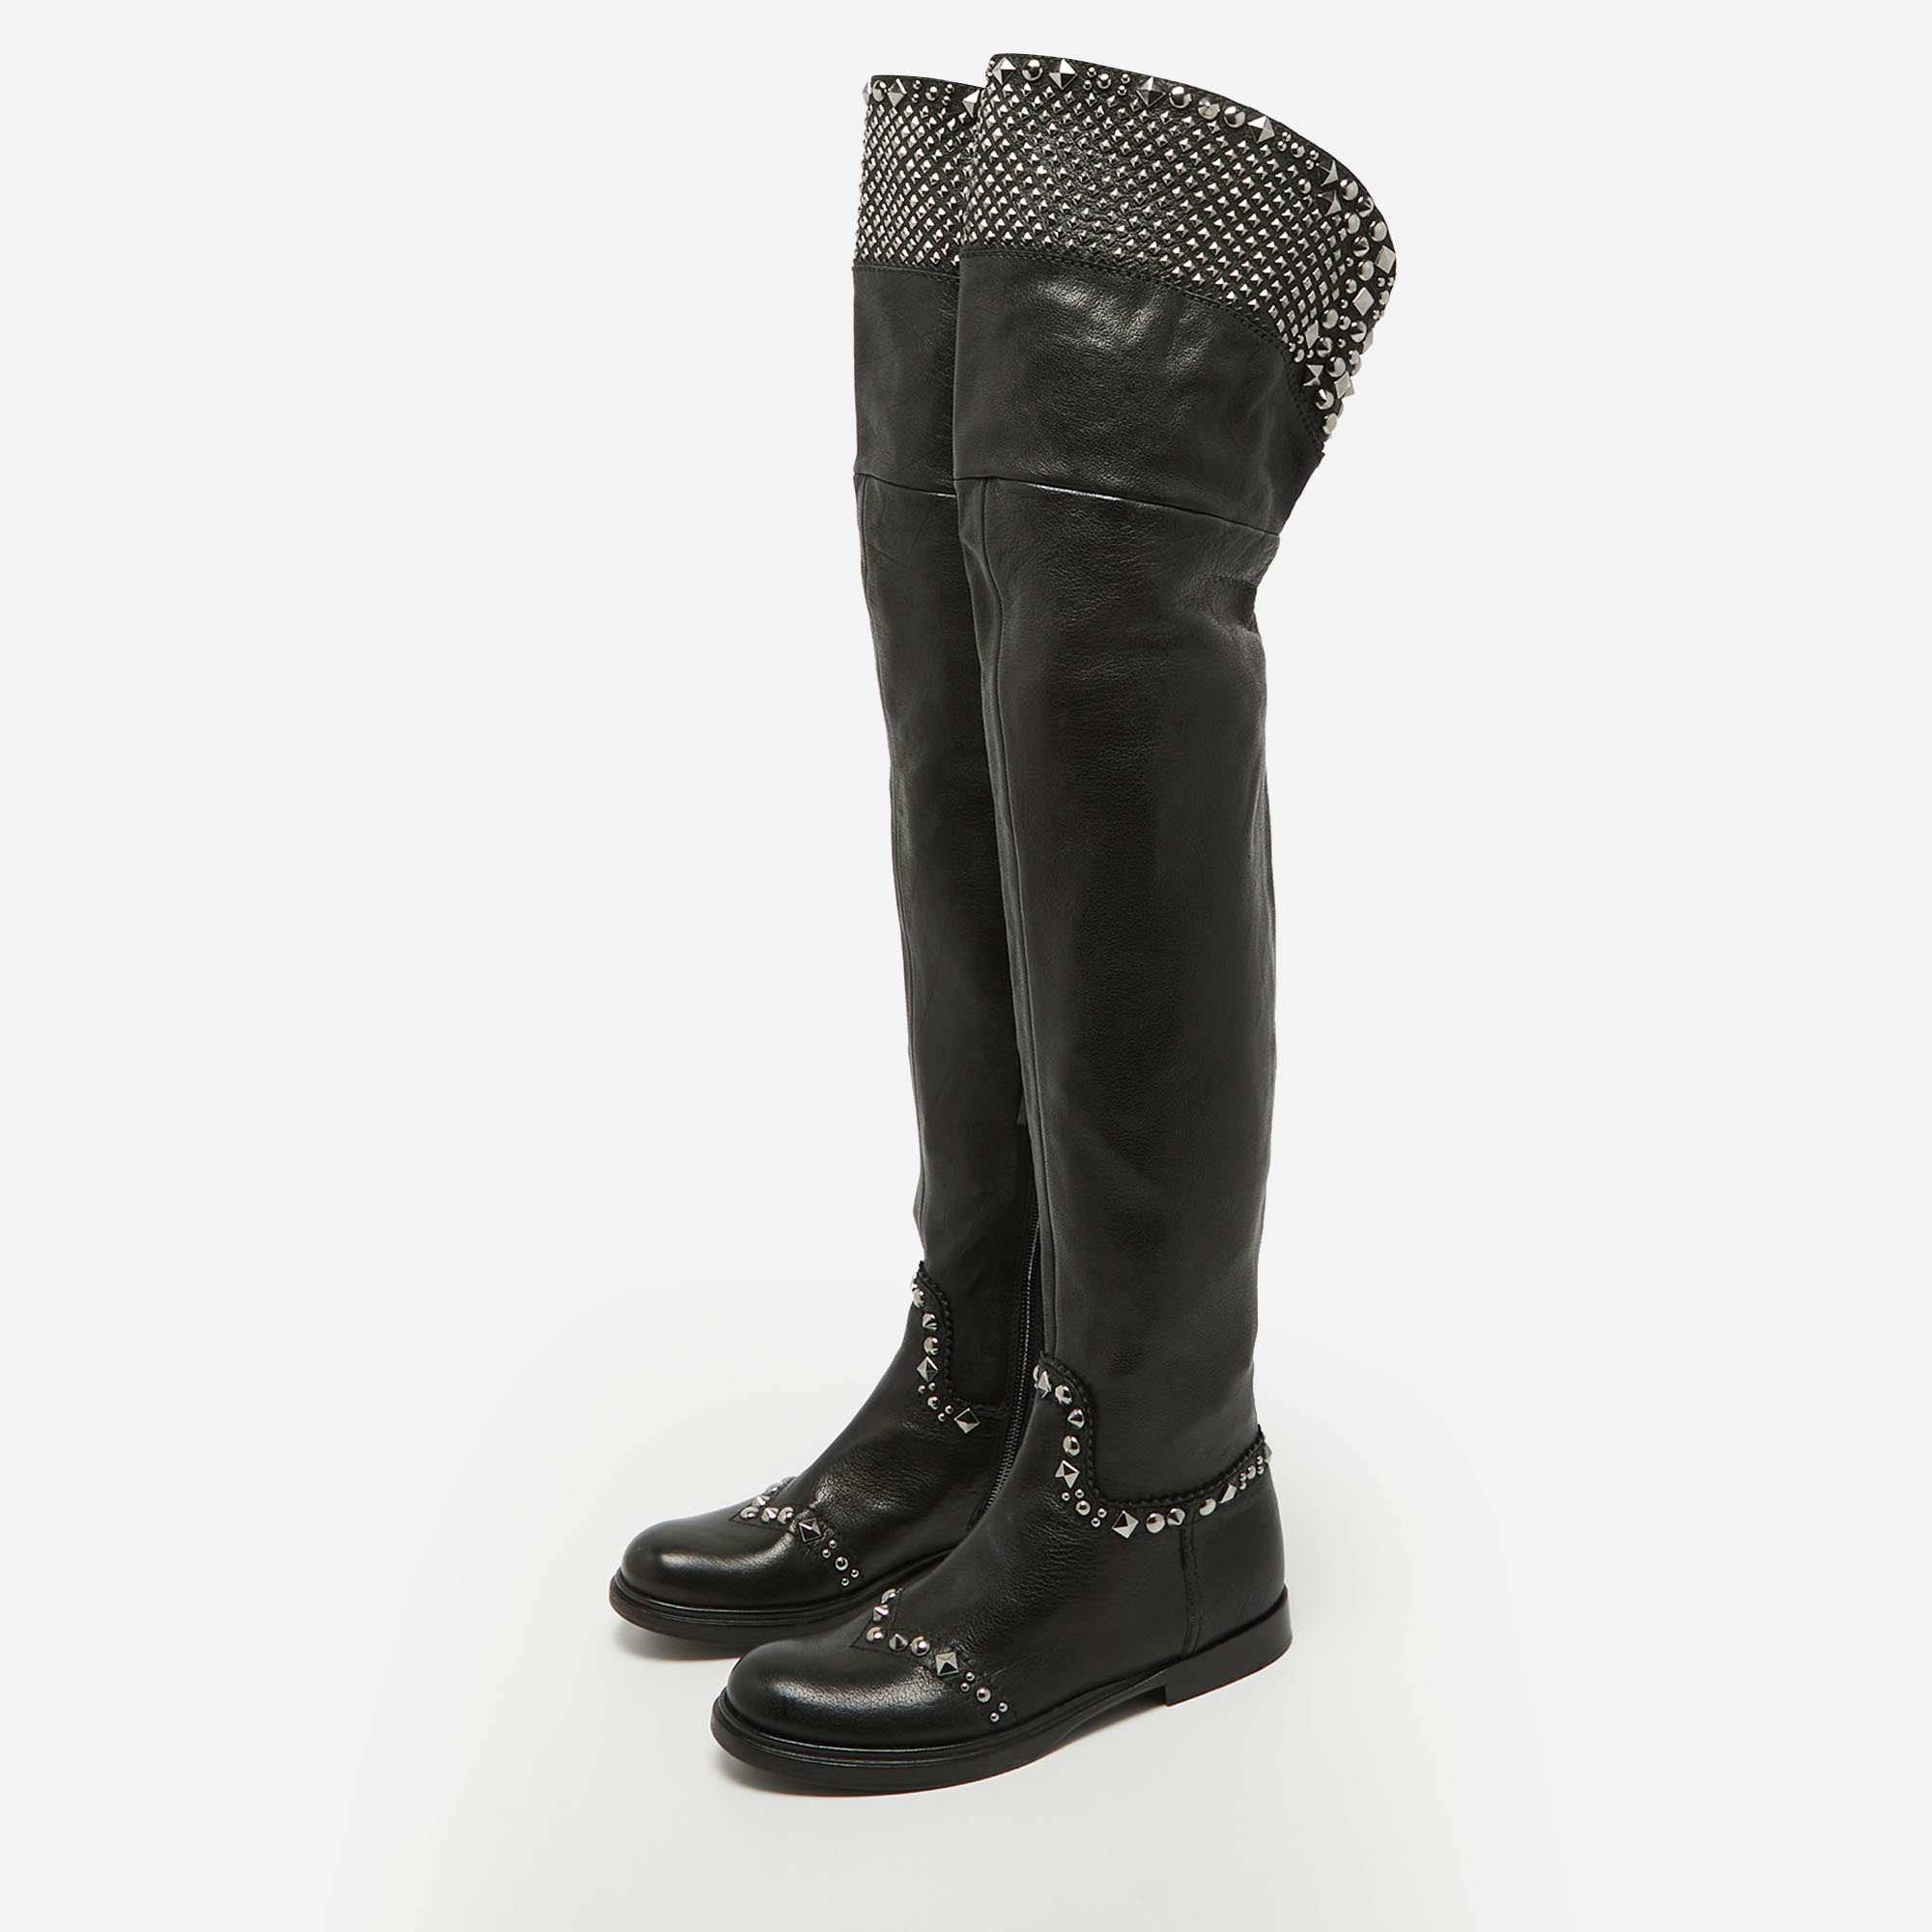 

Miu Miu Black Leather Stud Embellished Over The Knee Boots Size